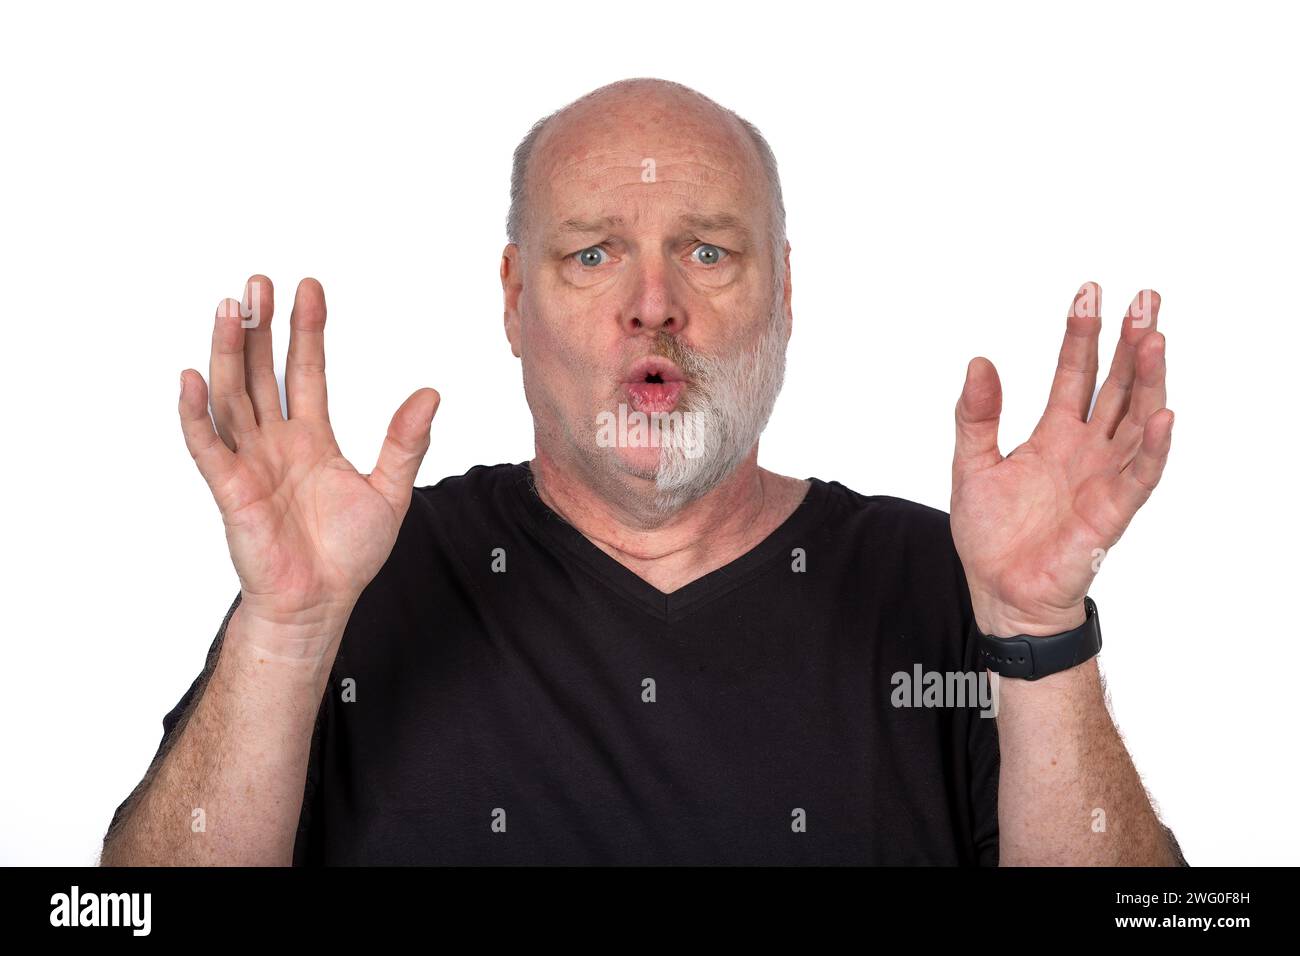 Middle-Aged Man in Black T-Shirt with Unique Facial Expression and Raised Hands, Expressive Portrait on White Background - Modern Lifestyle Concept Stock Photo